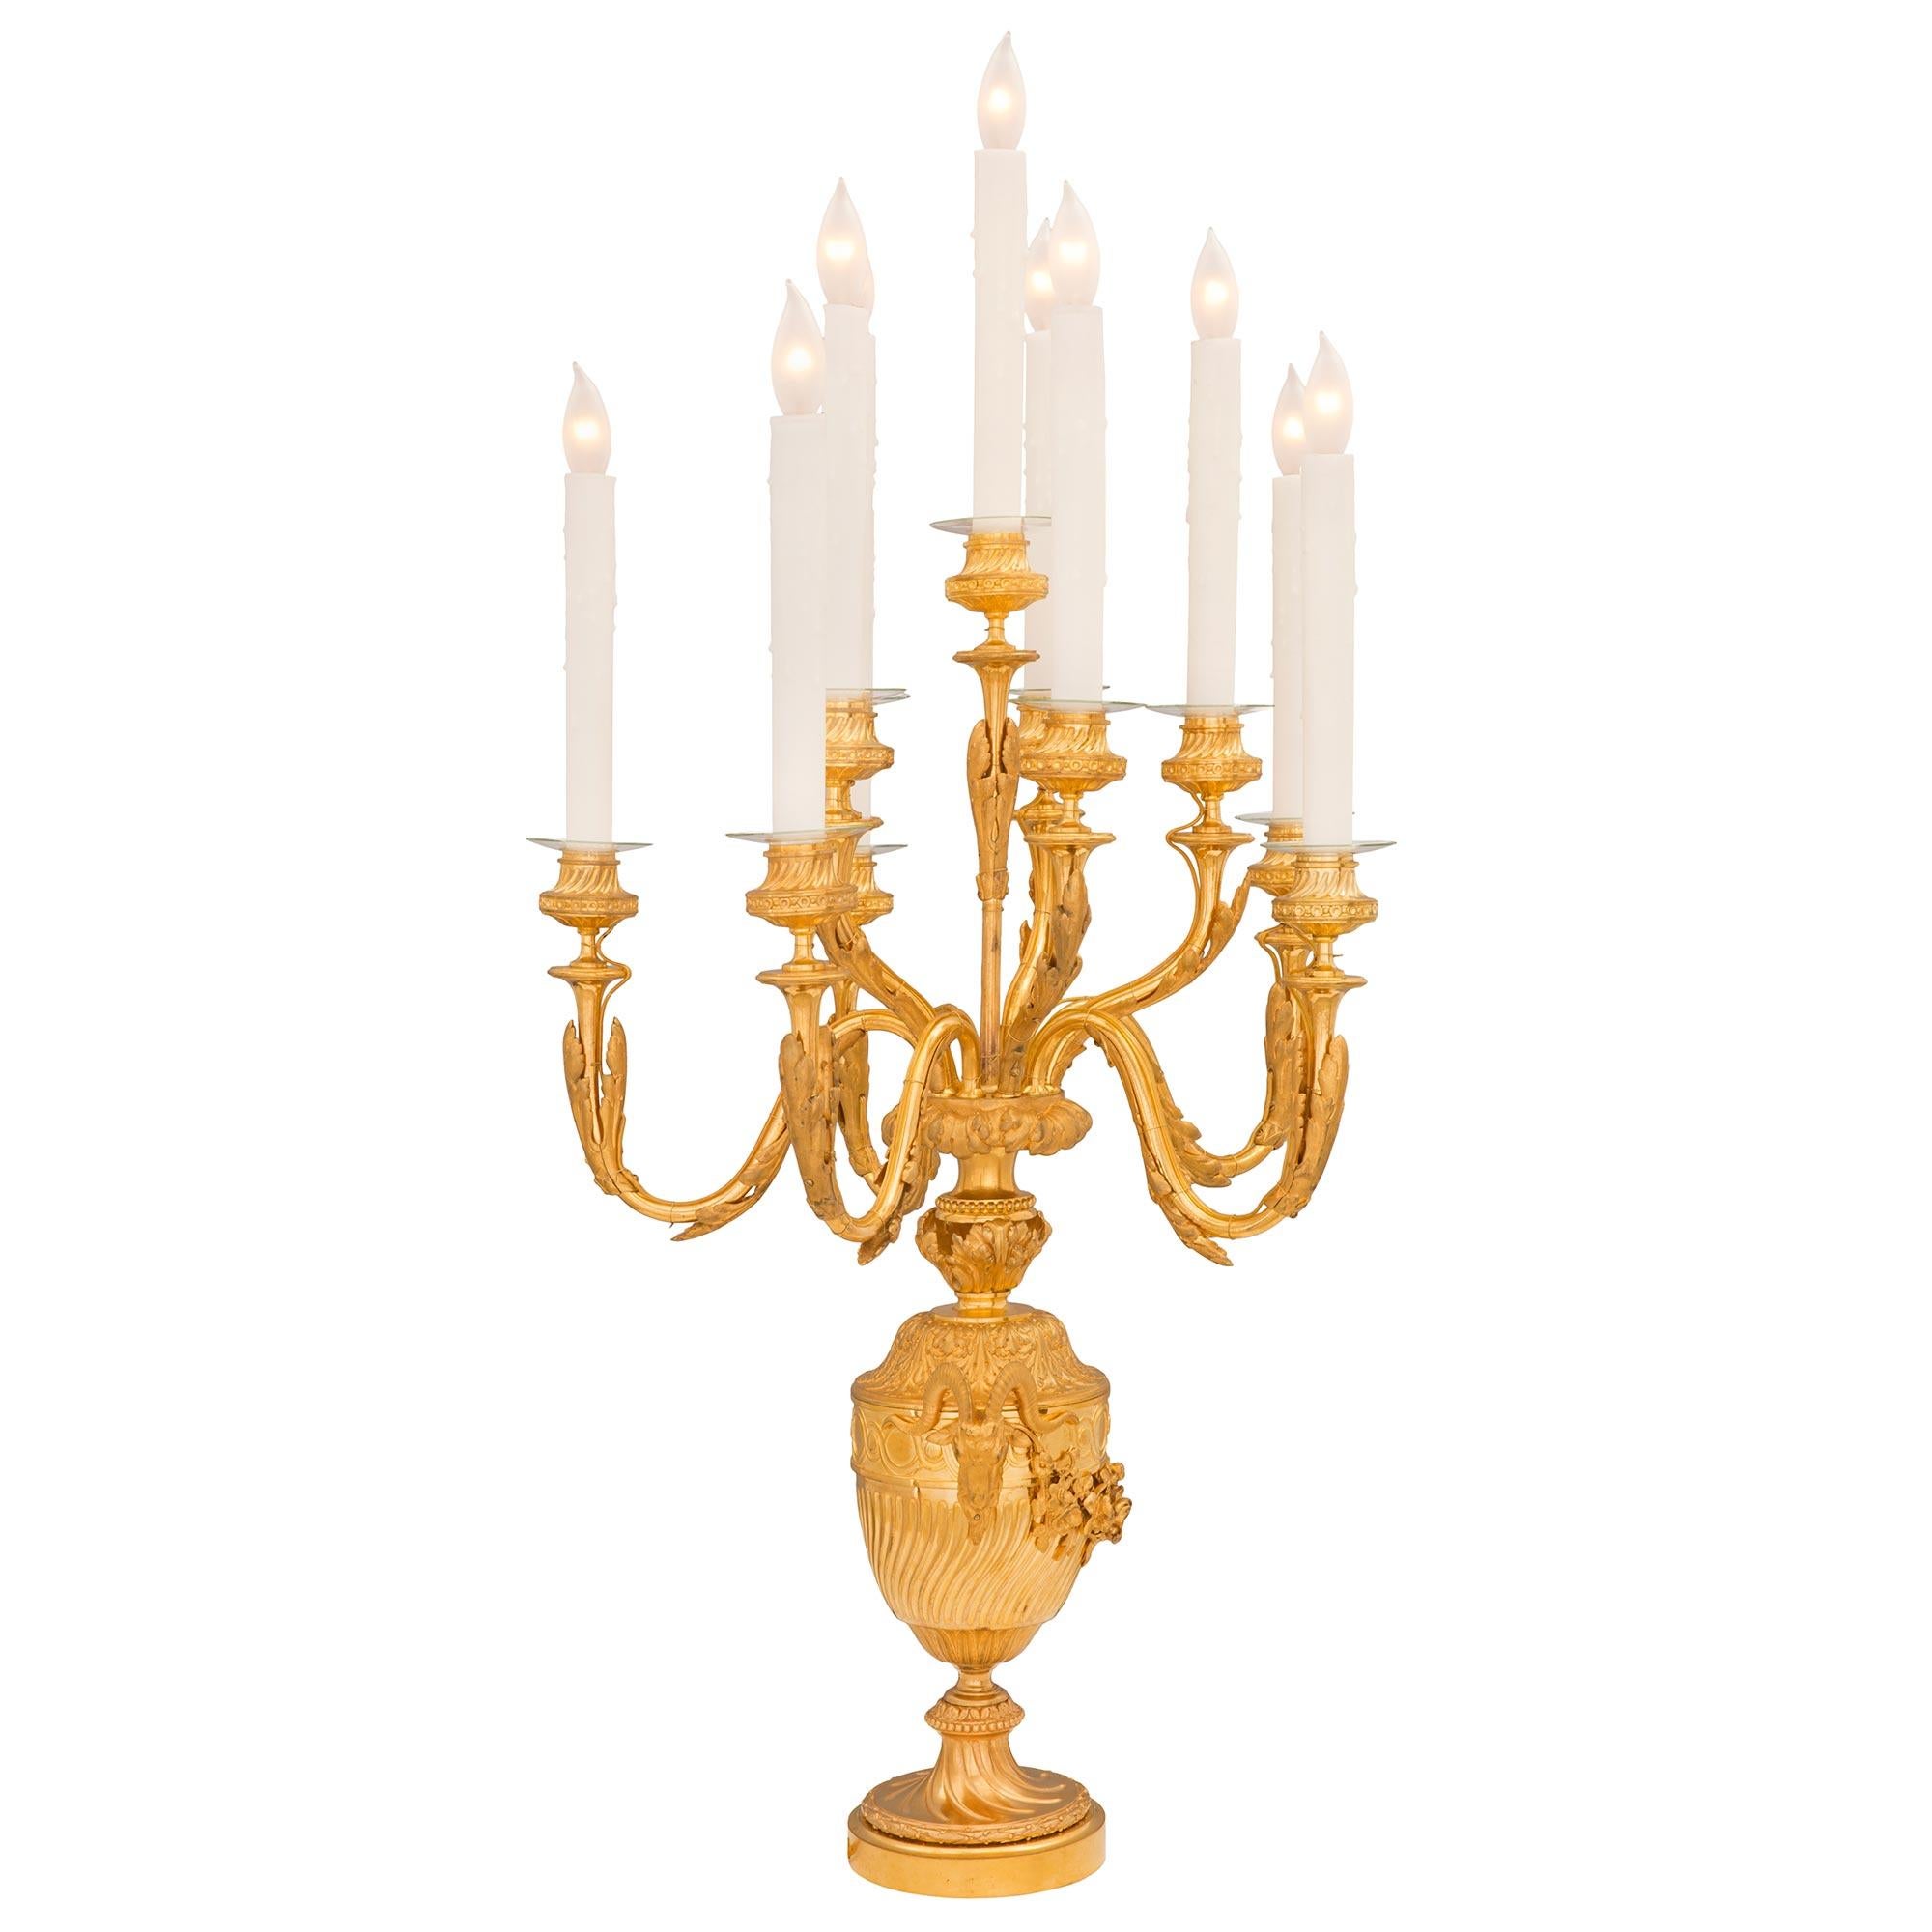 A magnificent pair of French 19th century Louis XVI st. ormolu candelabra lamps. Each eleven arm lamp is raised by an elegant circular base with a beautiful spiral fluted design and richly chased wrap around berried laurel band. The beautifully